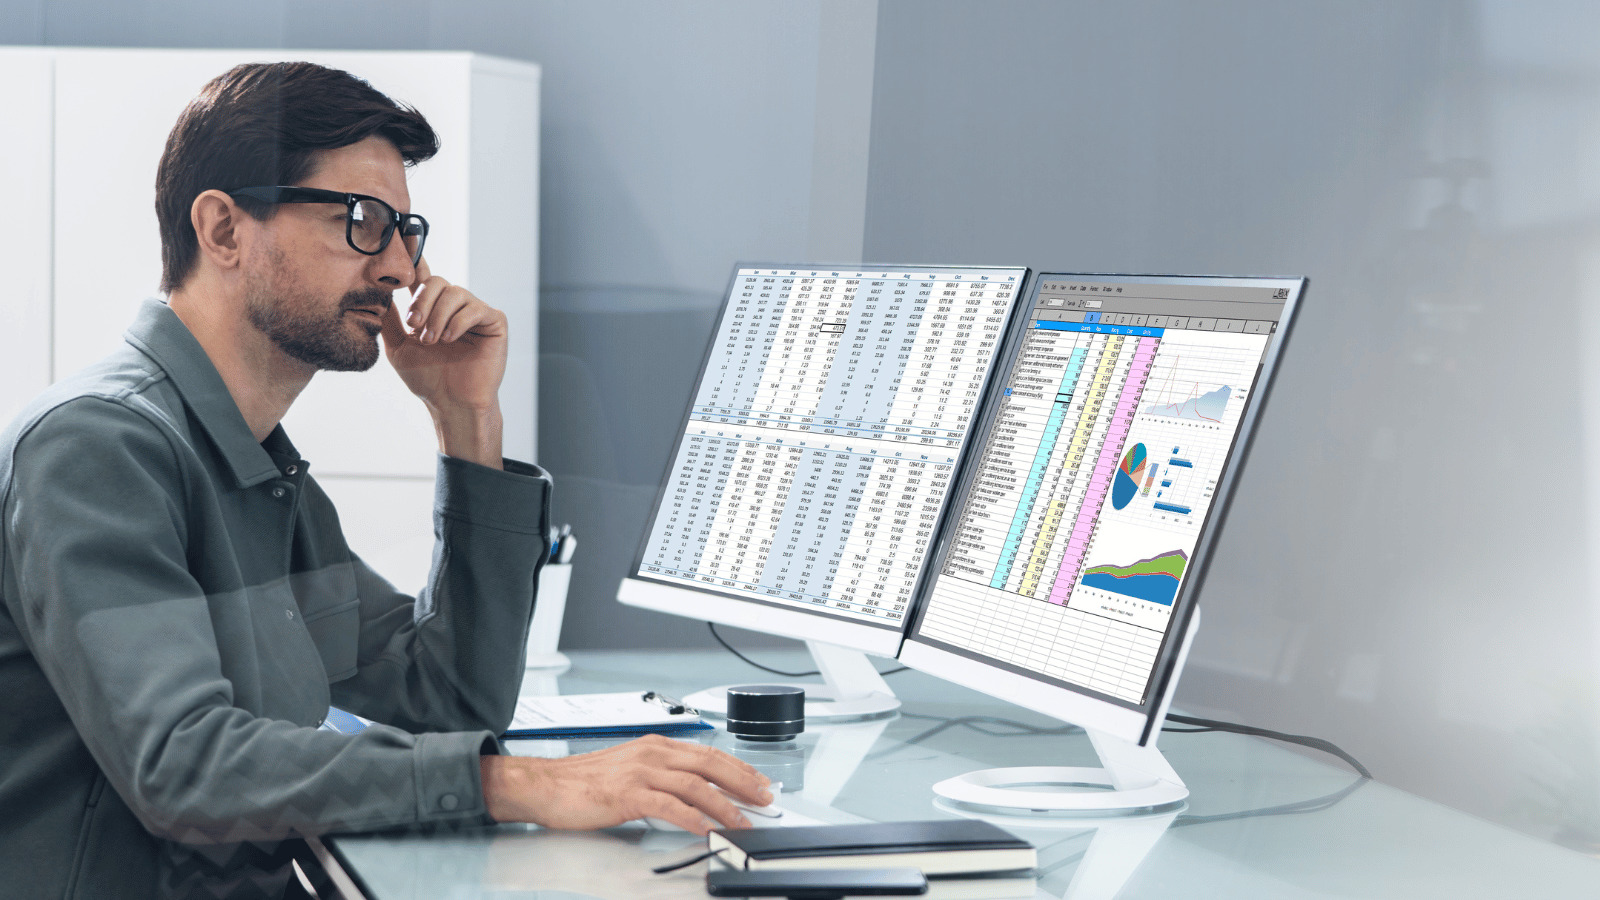 Banking executive sitting at desk staring at spreadsheets on two computer monitors